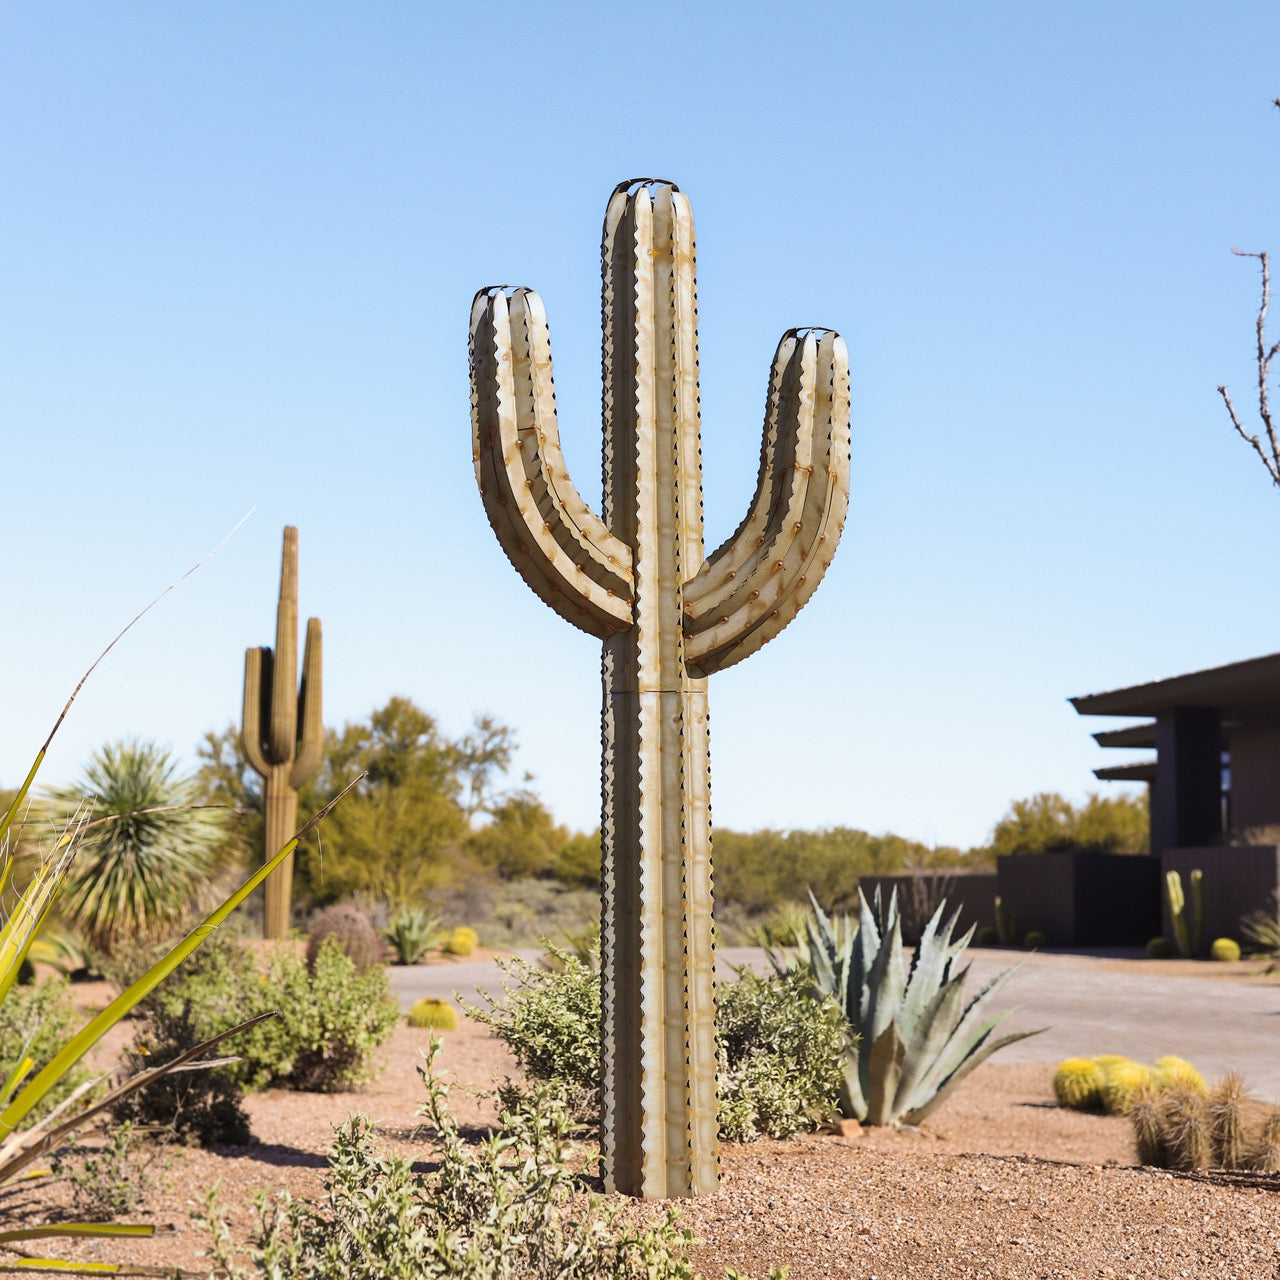 A metal saguaro cactus torch located in the desert. The sculpture's intricate design features a realistic saguaro body and arms, creating a lifelike appearance.